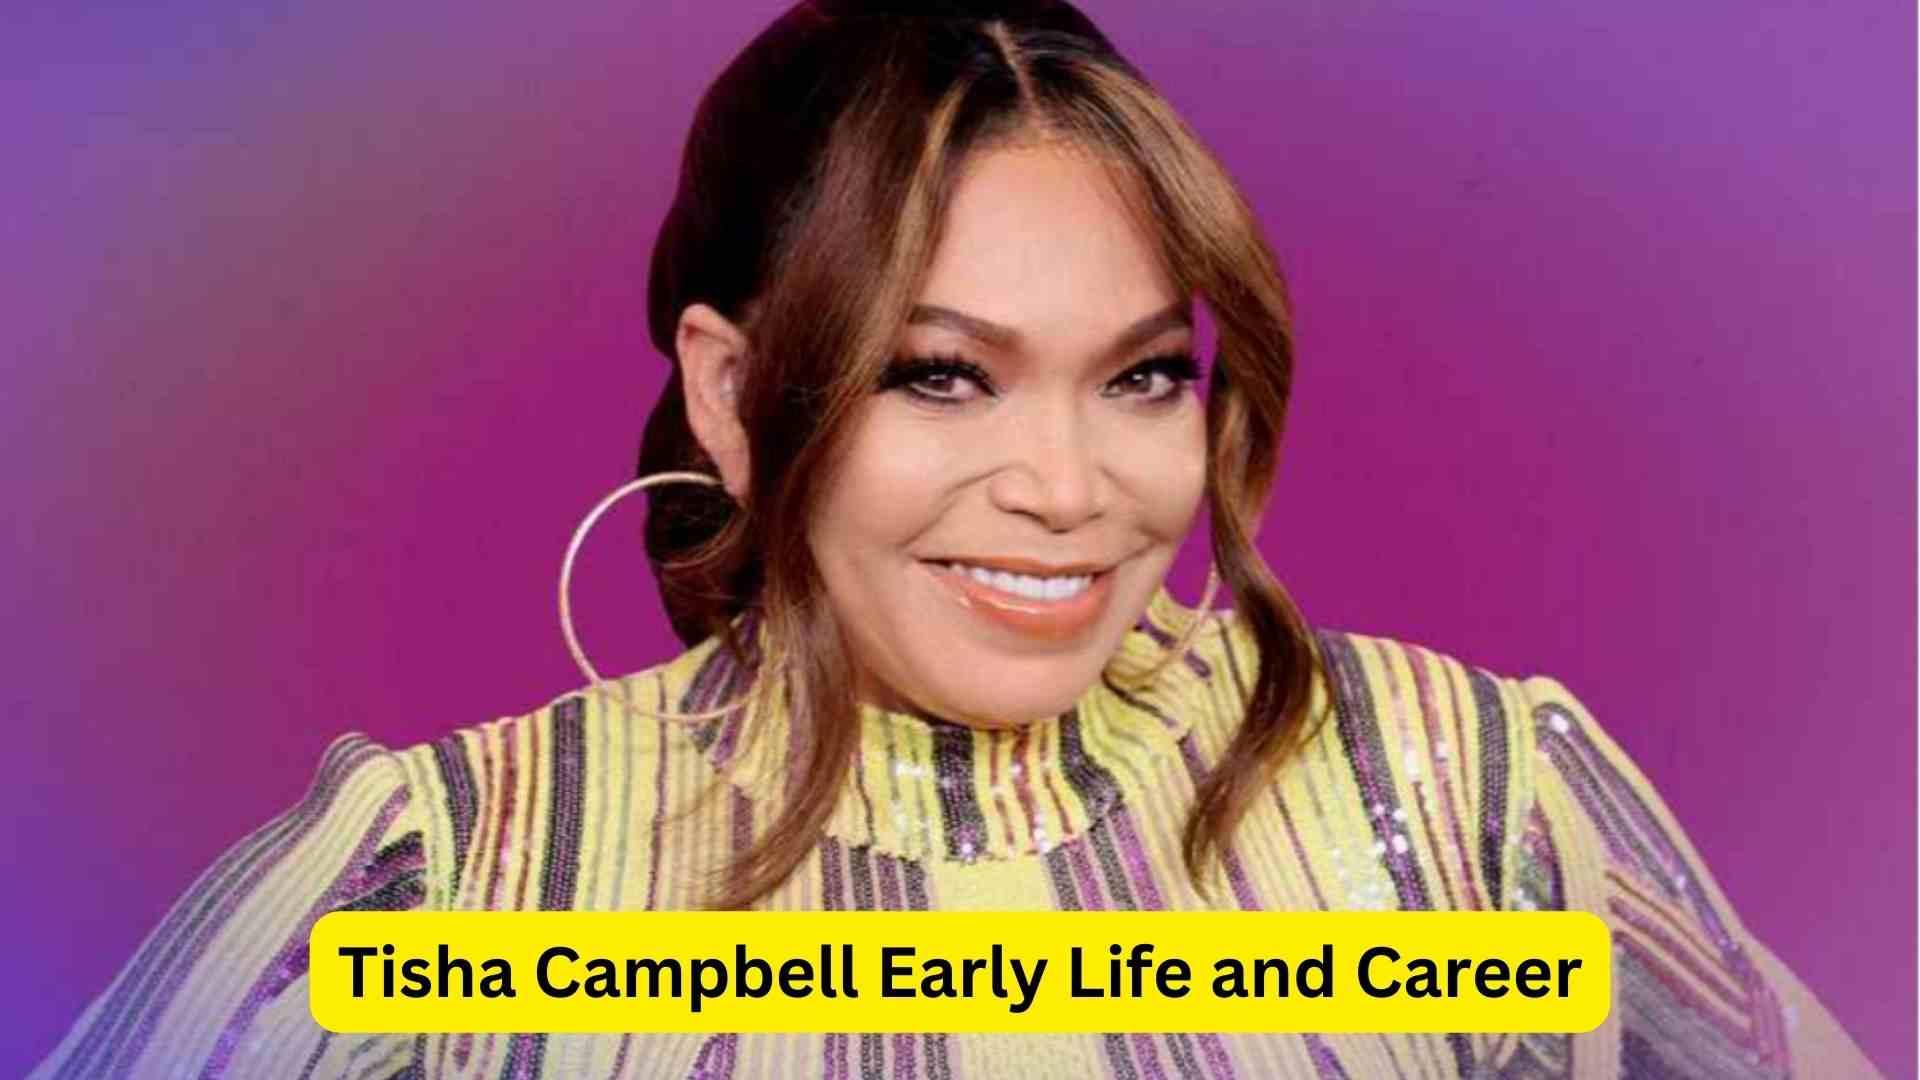 Tisha Campbell Early Life and Career